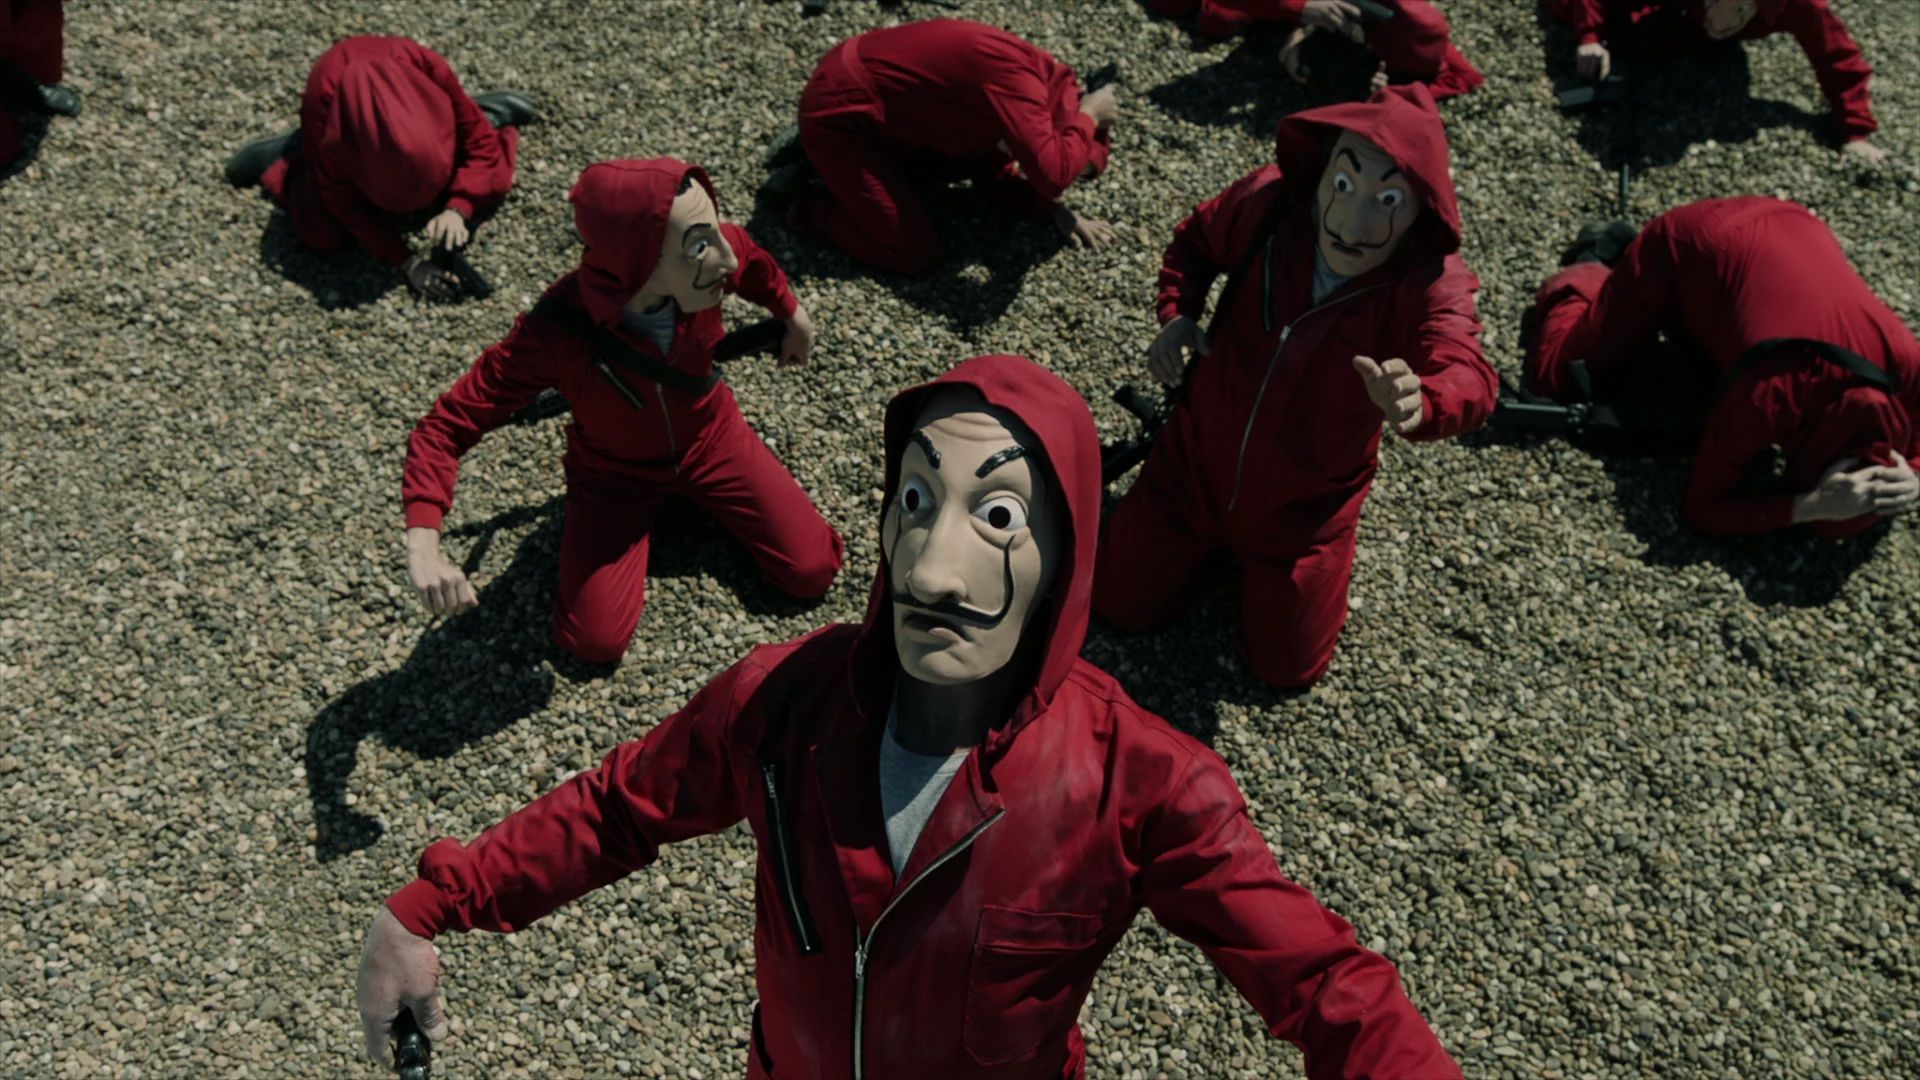 Year 20** is gonna be too much fun!: When is La Casa De Papel 'Money Heist' returning with Season 4? Find out!